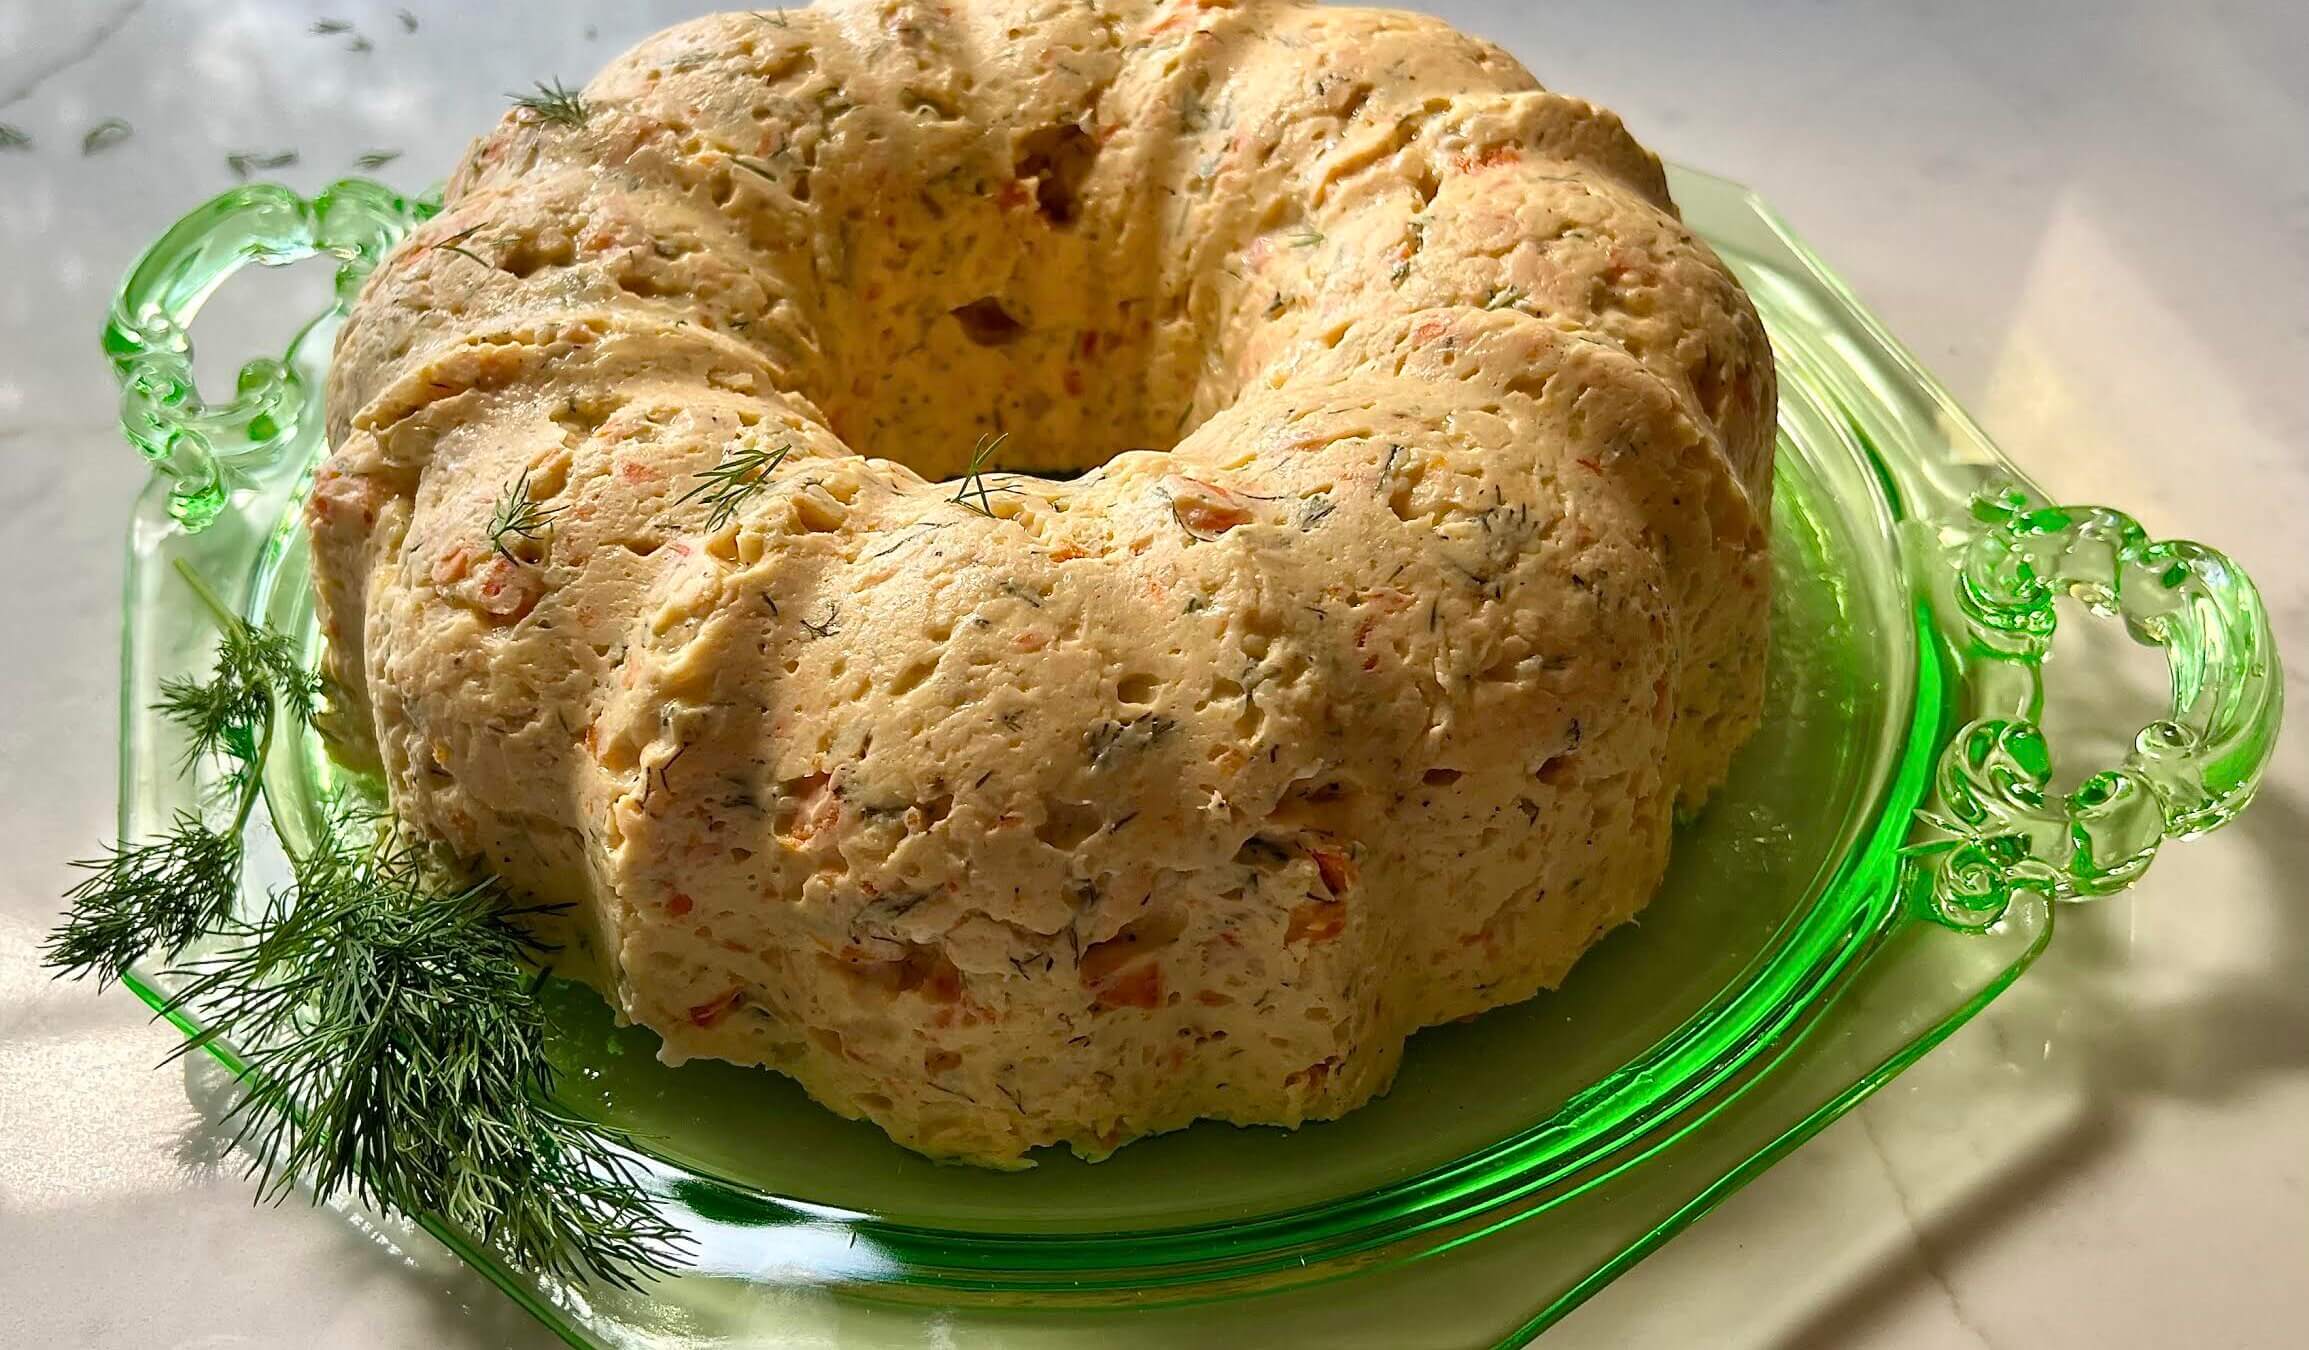 Believe it or not, that's gefilte fish, reinvented with salmon and cooked in a bundt pan!